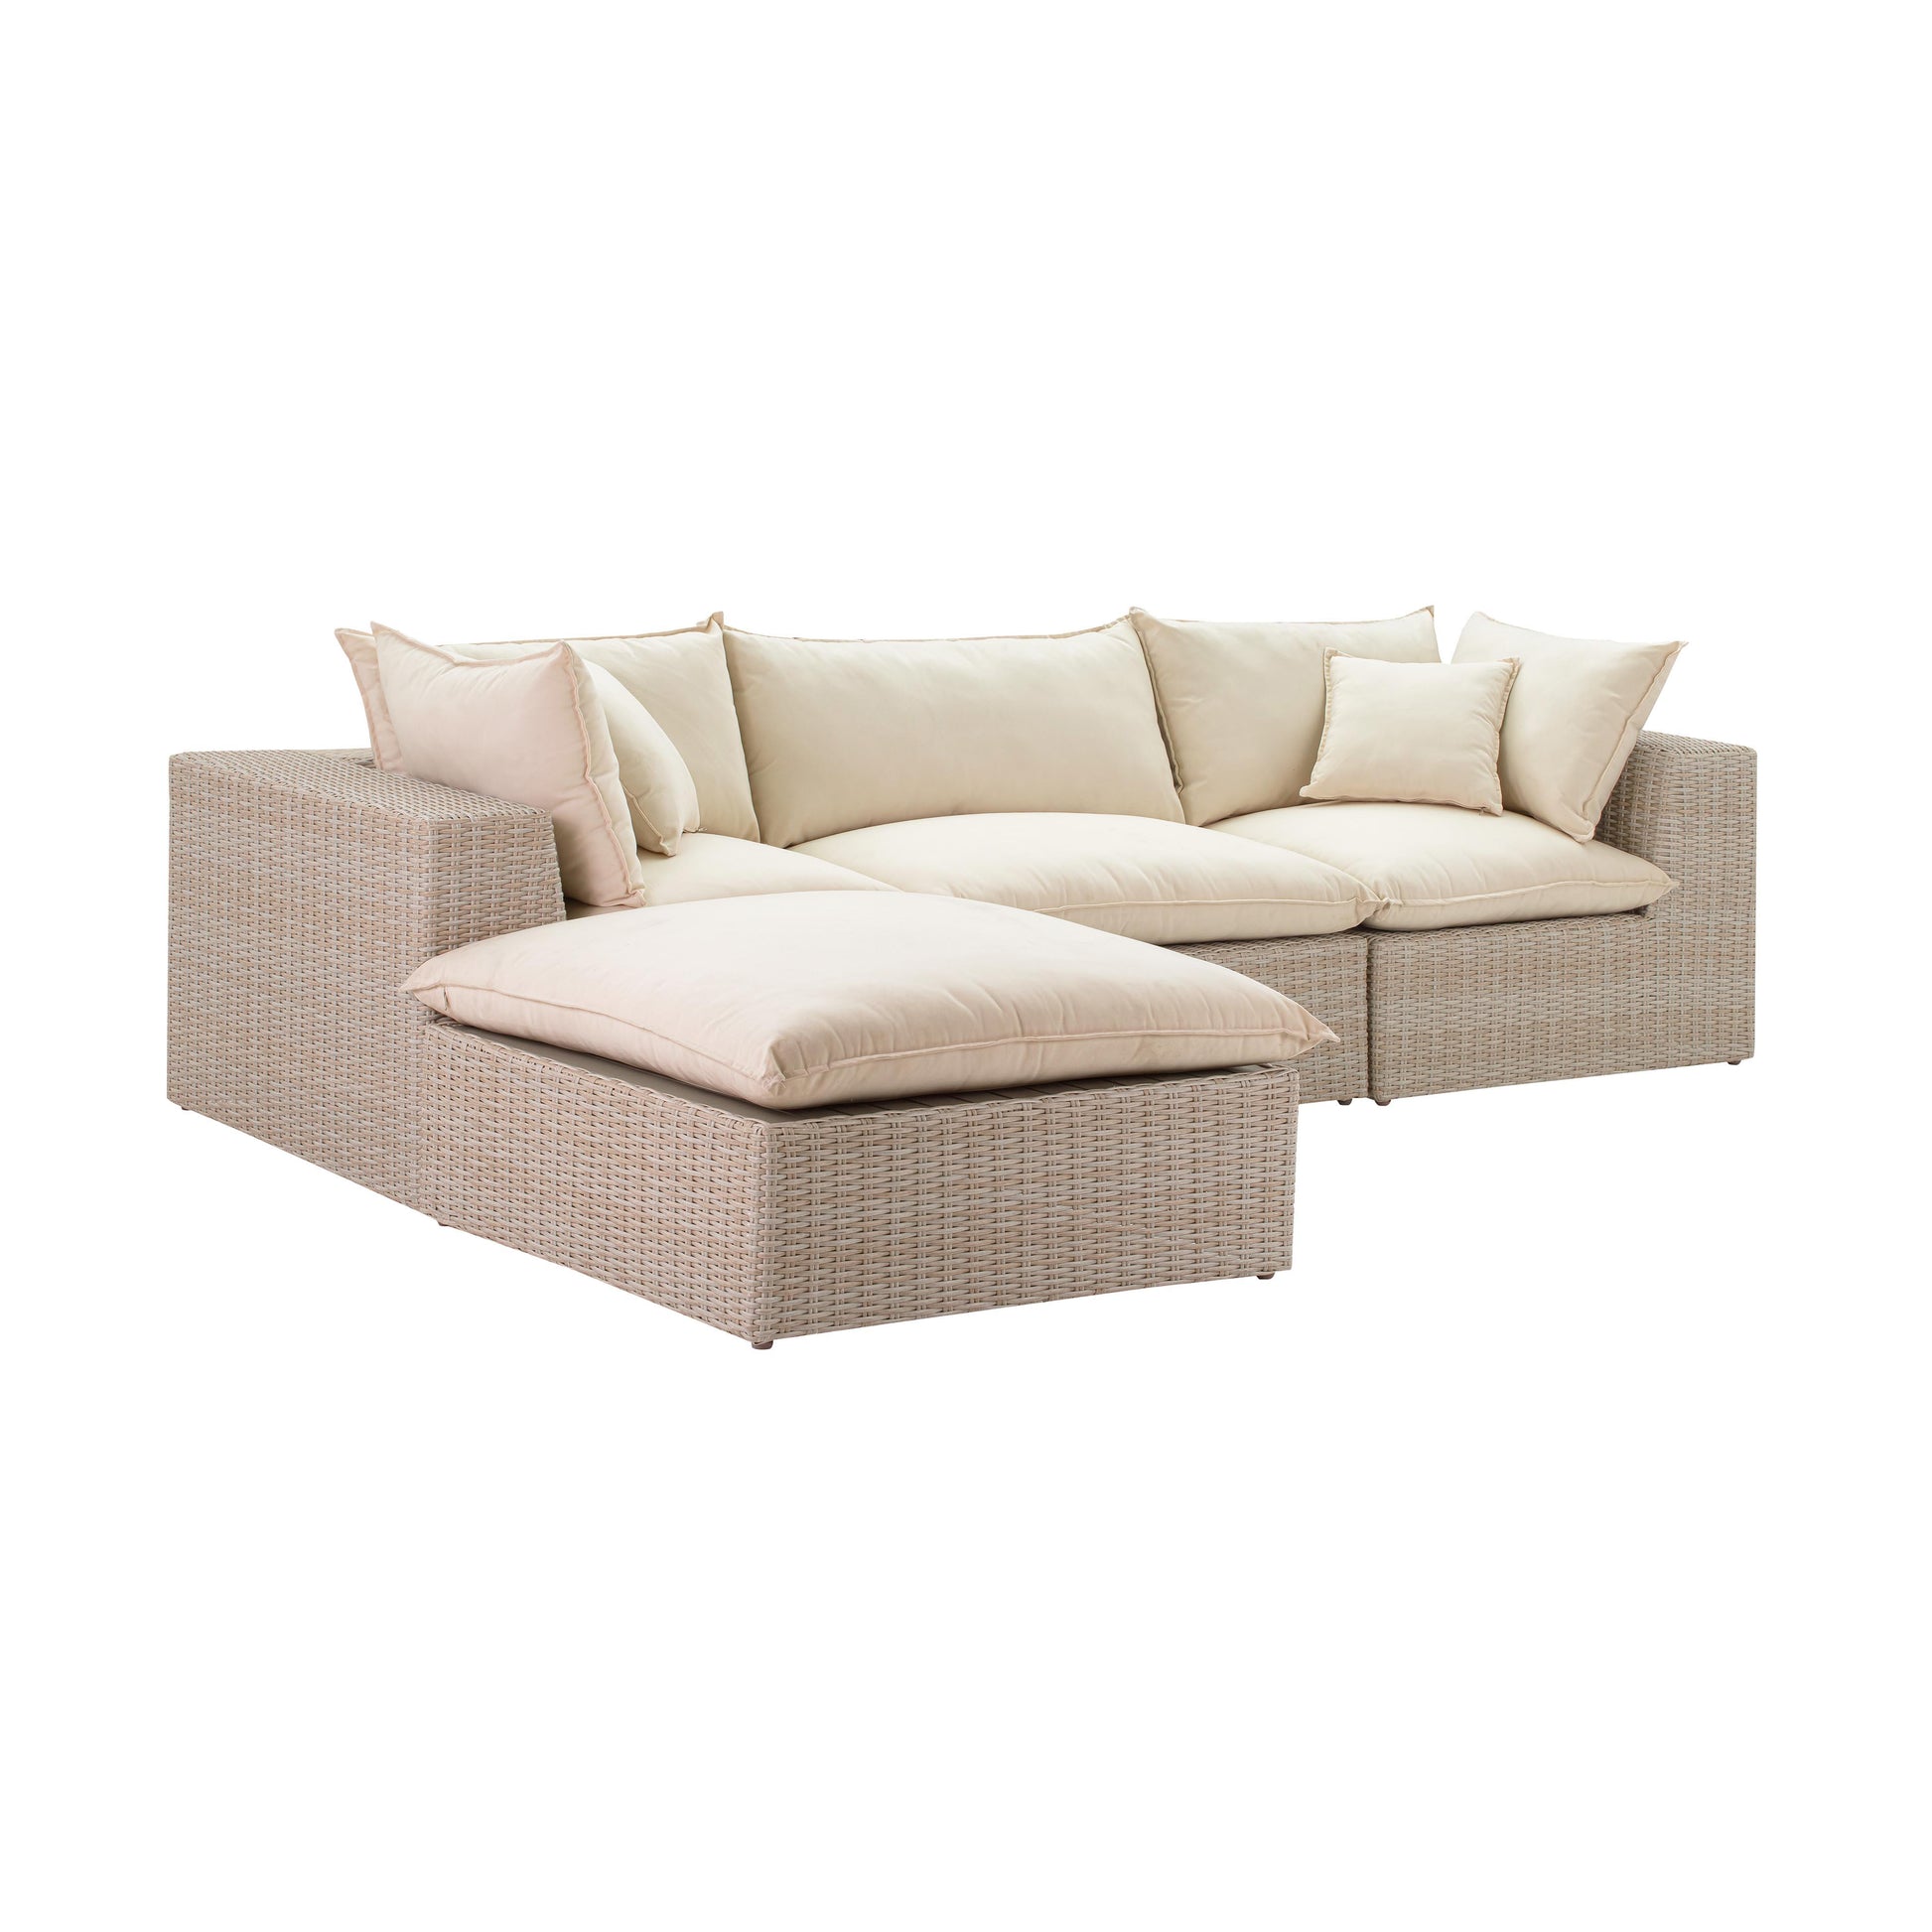 Tov Furniture Cali Natural Wicker Outdoor Modular Sectional